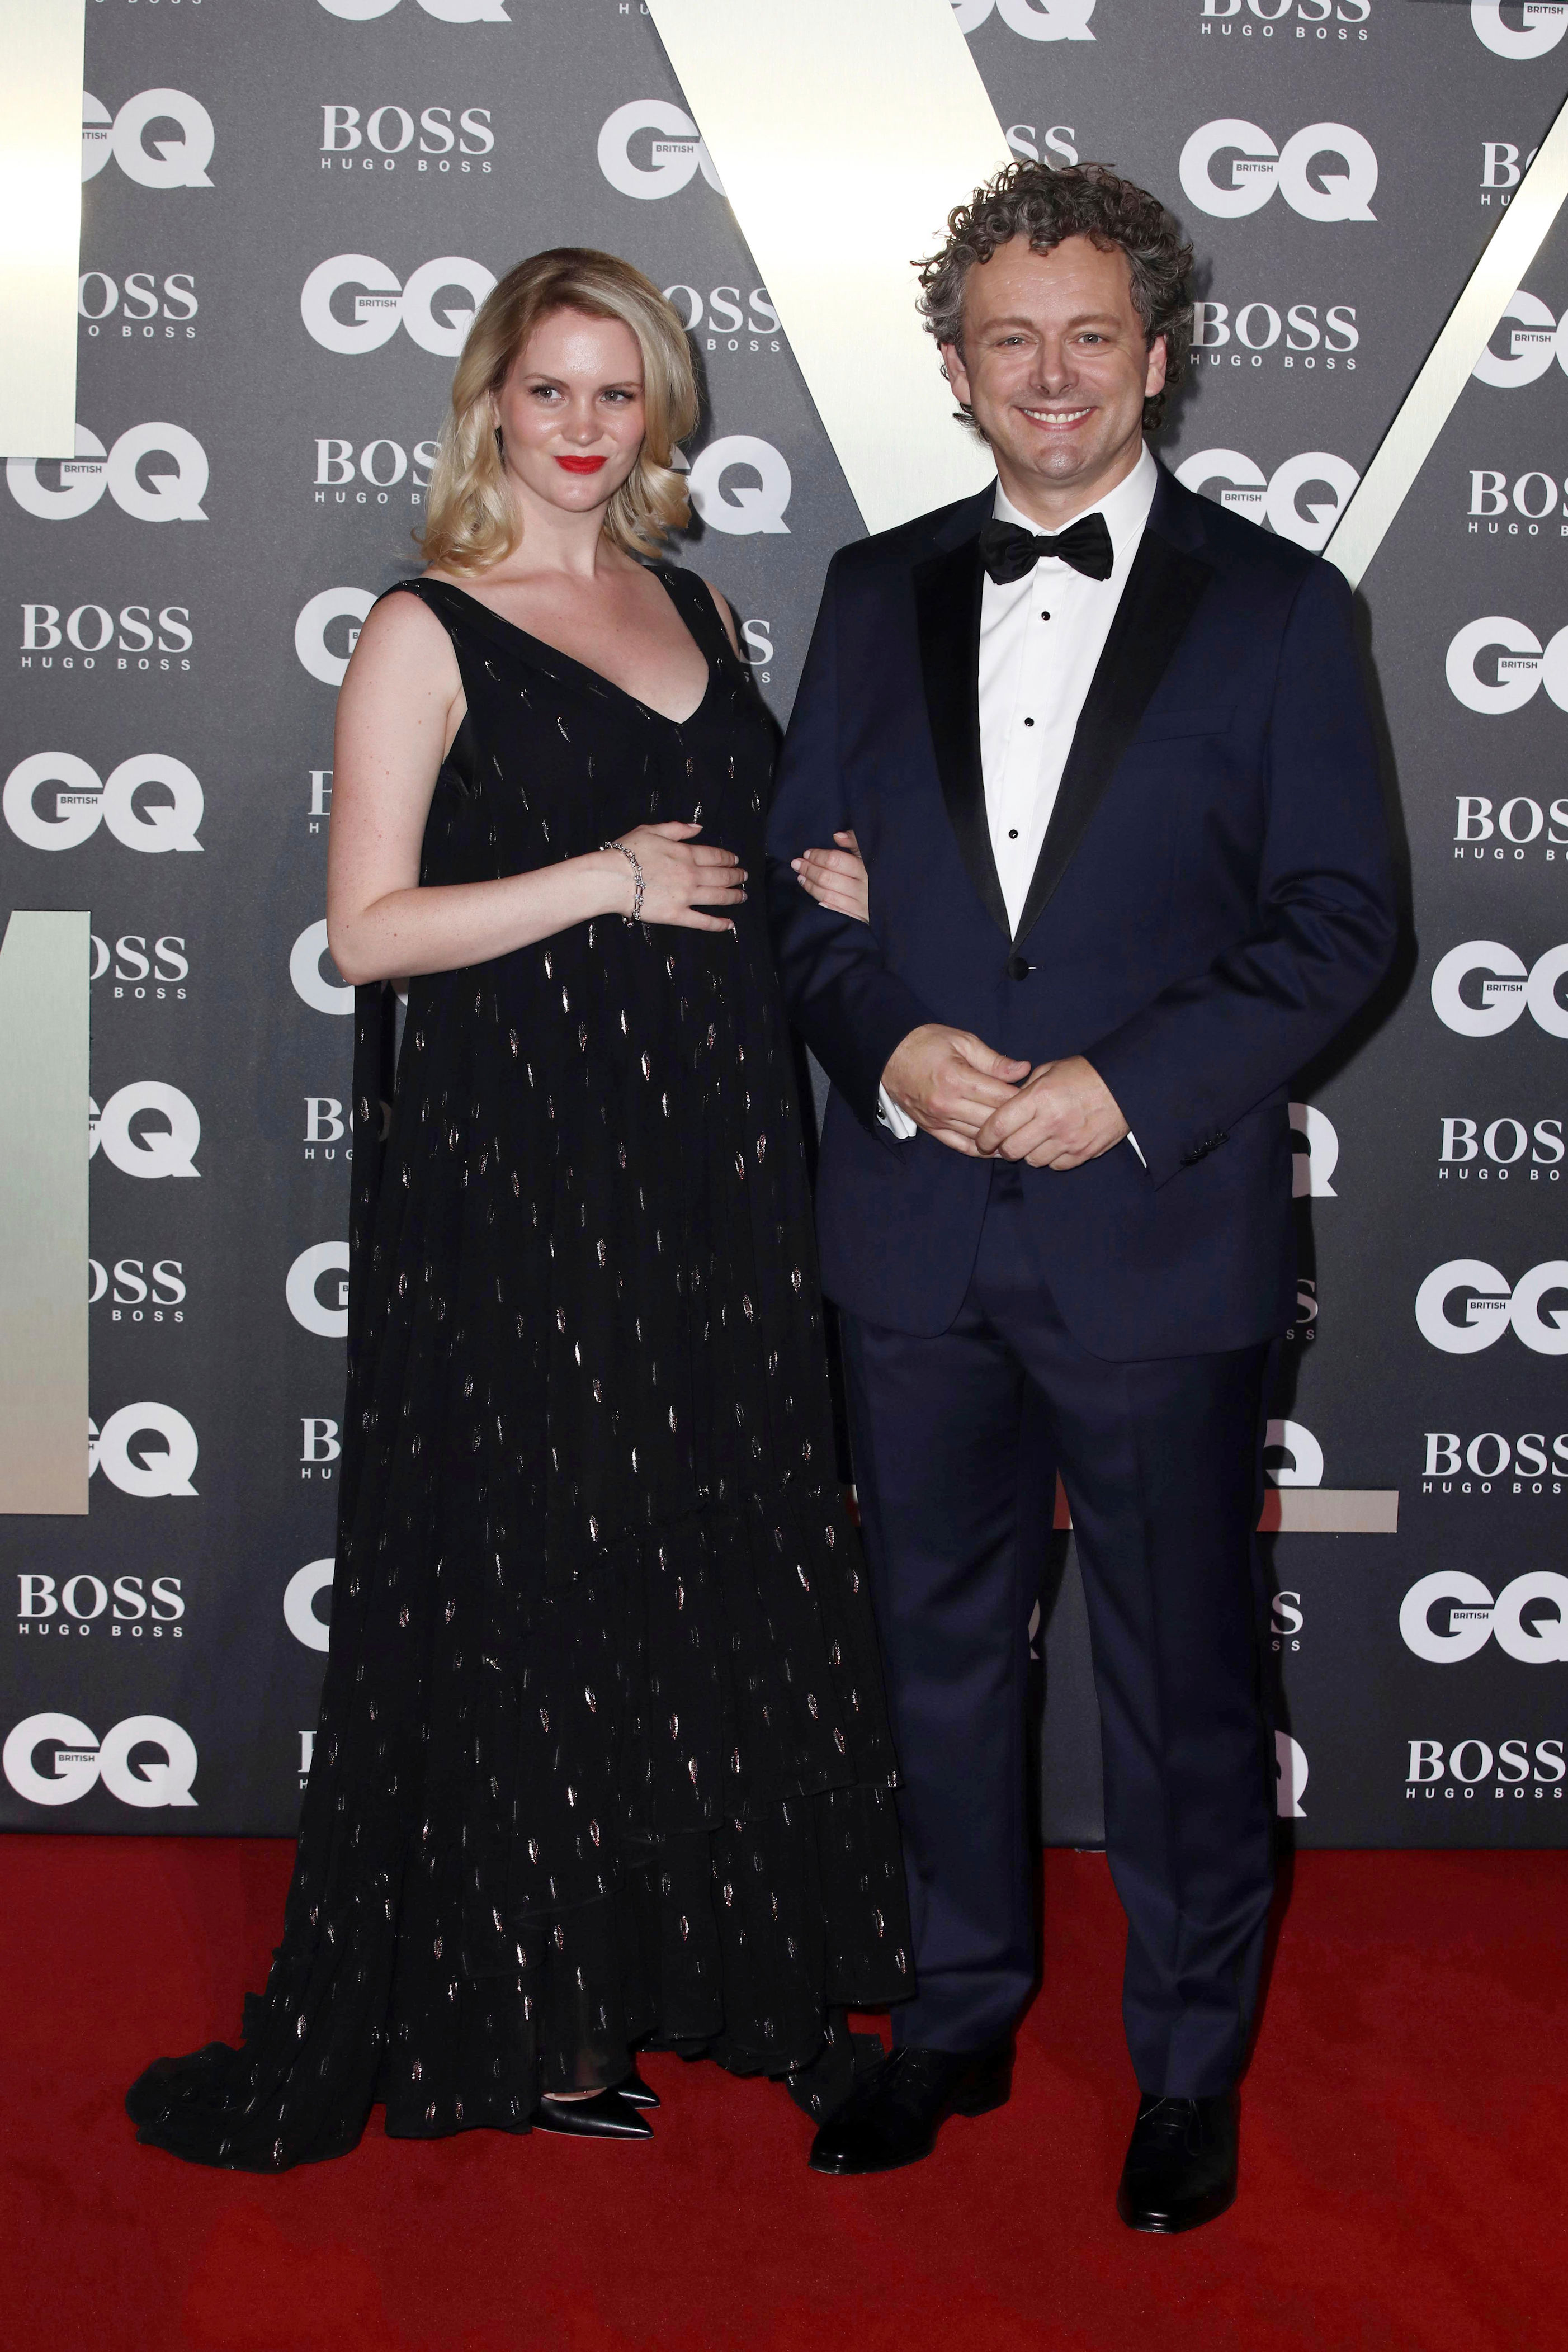 <p>On July 17, 2019 -- not long after it emerged that they were dating -- Welsh actor Michael Sheen, who was 50 at the time, took to Twitter to reveal that he and then-25-year-old Swedish actress Anna Lundberg were <a href="https://www.wonderwall.com/celebrity/michael-sheen-and-anna-lundberg-are-expecting-their-first-child-together-plus-more-news-3020382.gallery">expecting a baby</a> together. "Very happy to let everyone know that my partner Anna and I are expecting a little angel of our own," the "Good Omens" star wrote. They <a href="https://www.wonderwall.com/news/michael-sheen-reveals-newborn-daughters-name-3021226.article">welcomed daughter Lyra</a> that September and in 2022 became parents again.</p>